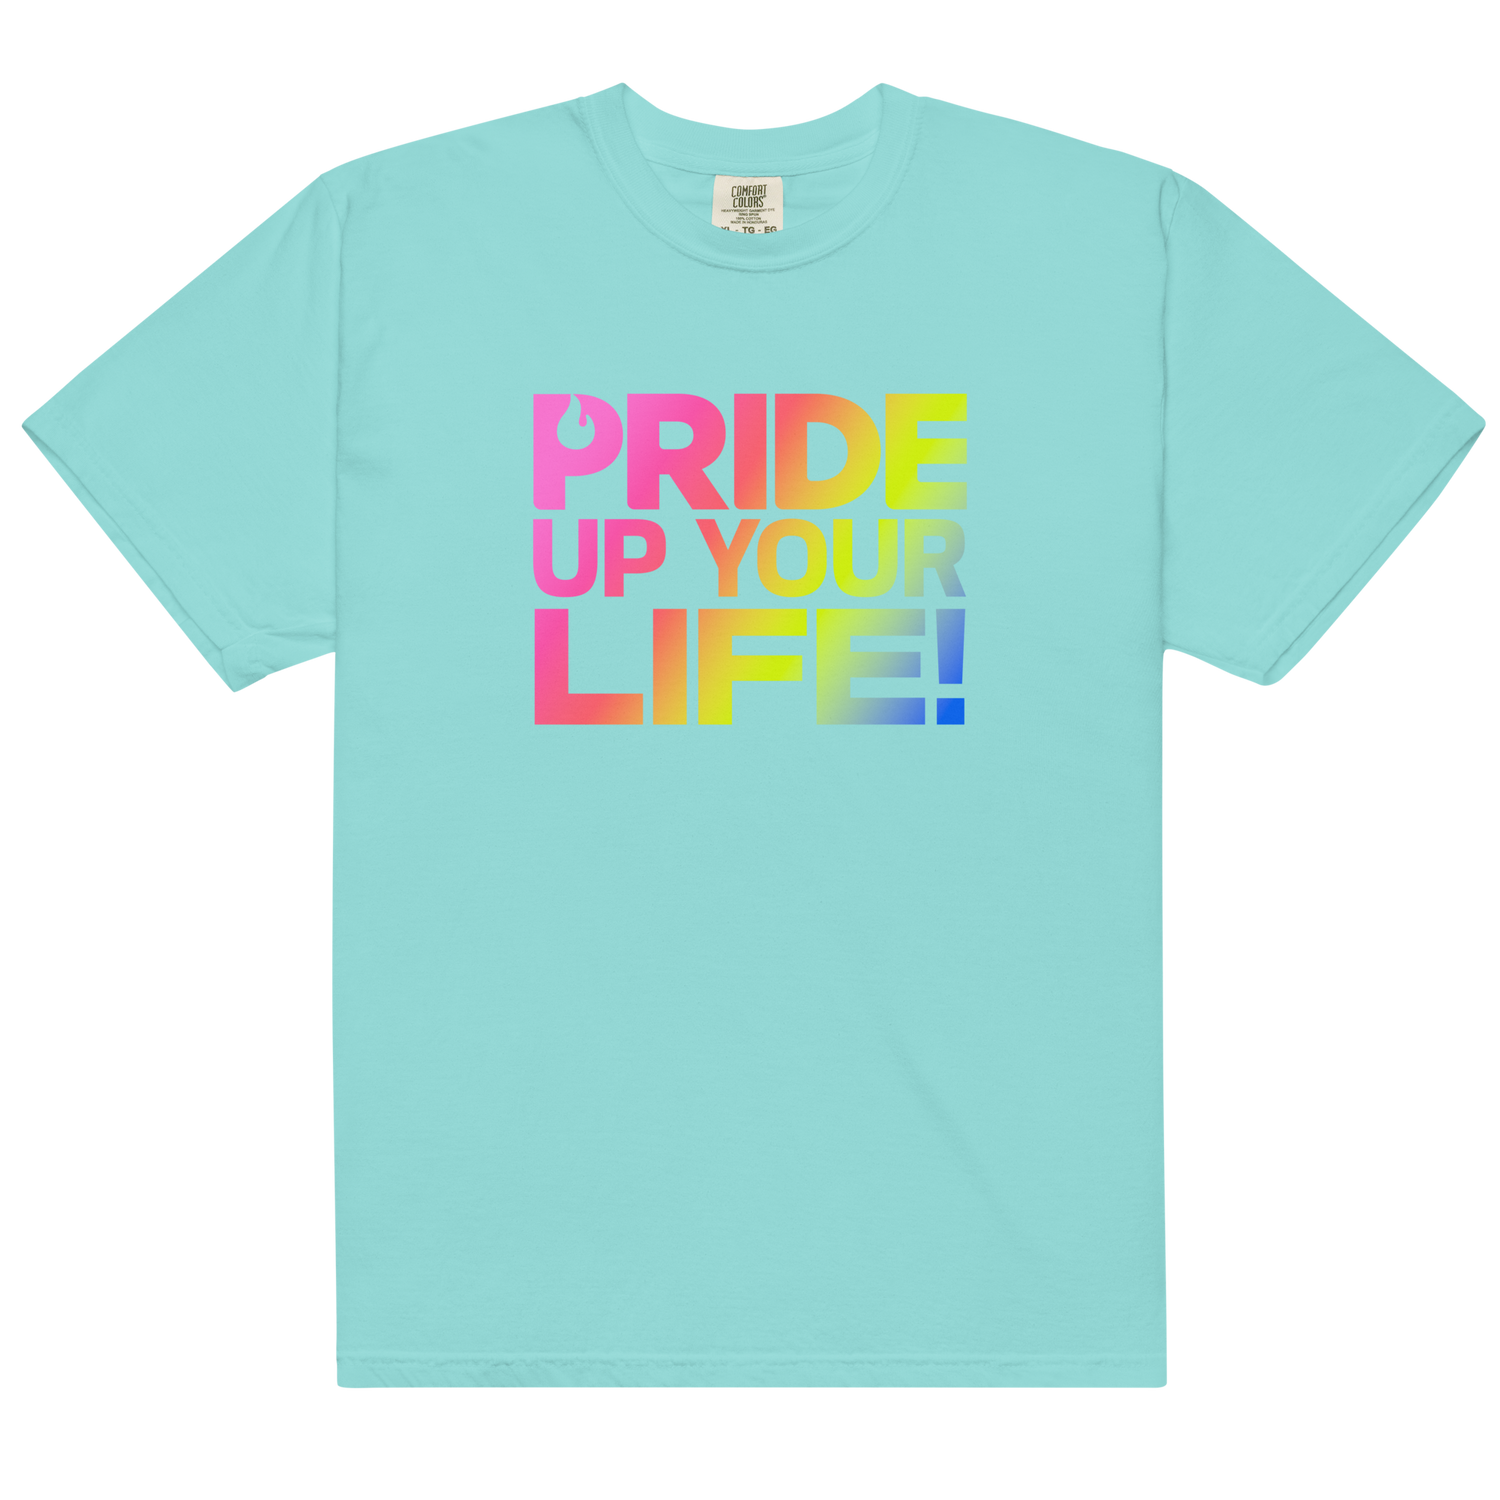 Pride Up Your Life Unisex Garment-dyed Heavyweight T-shirt